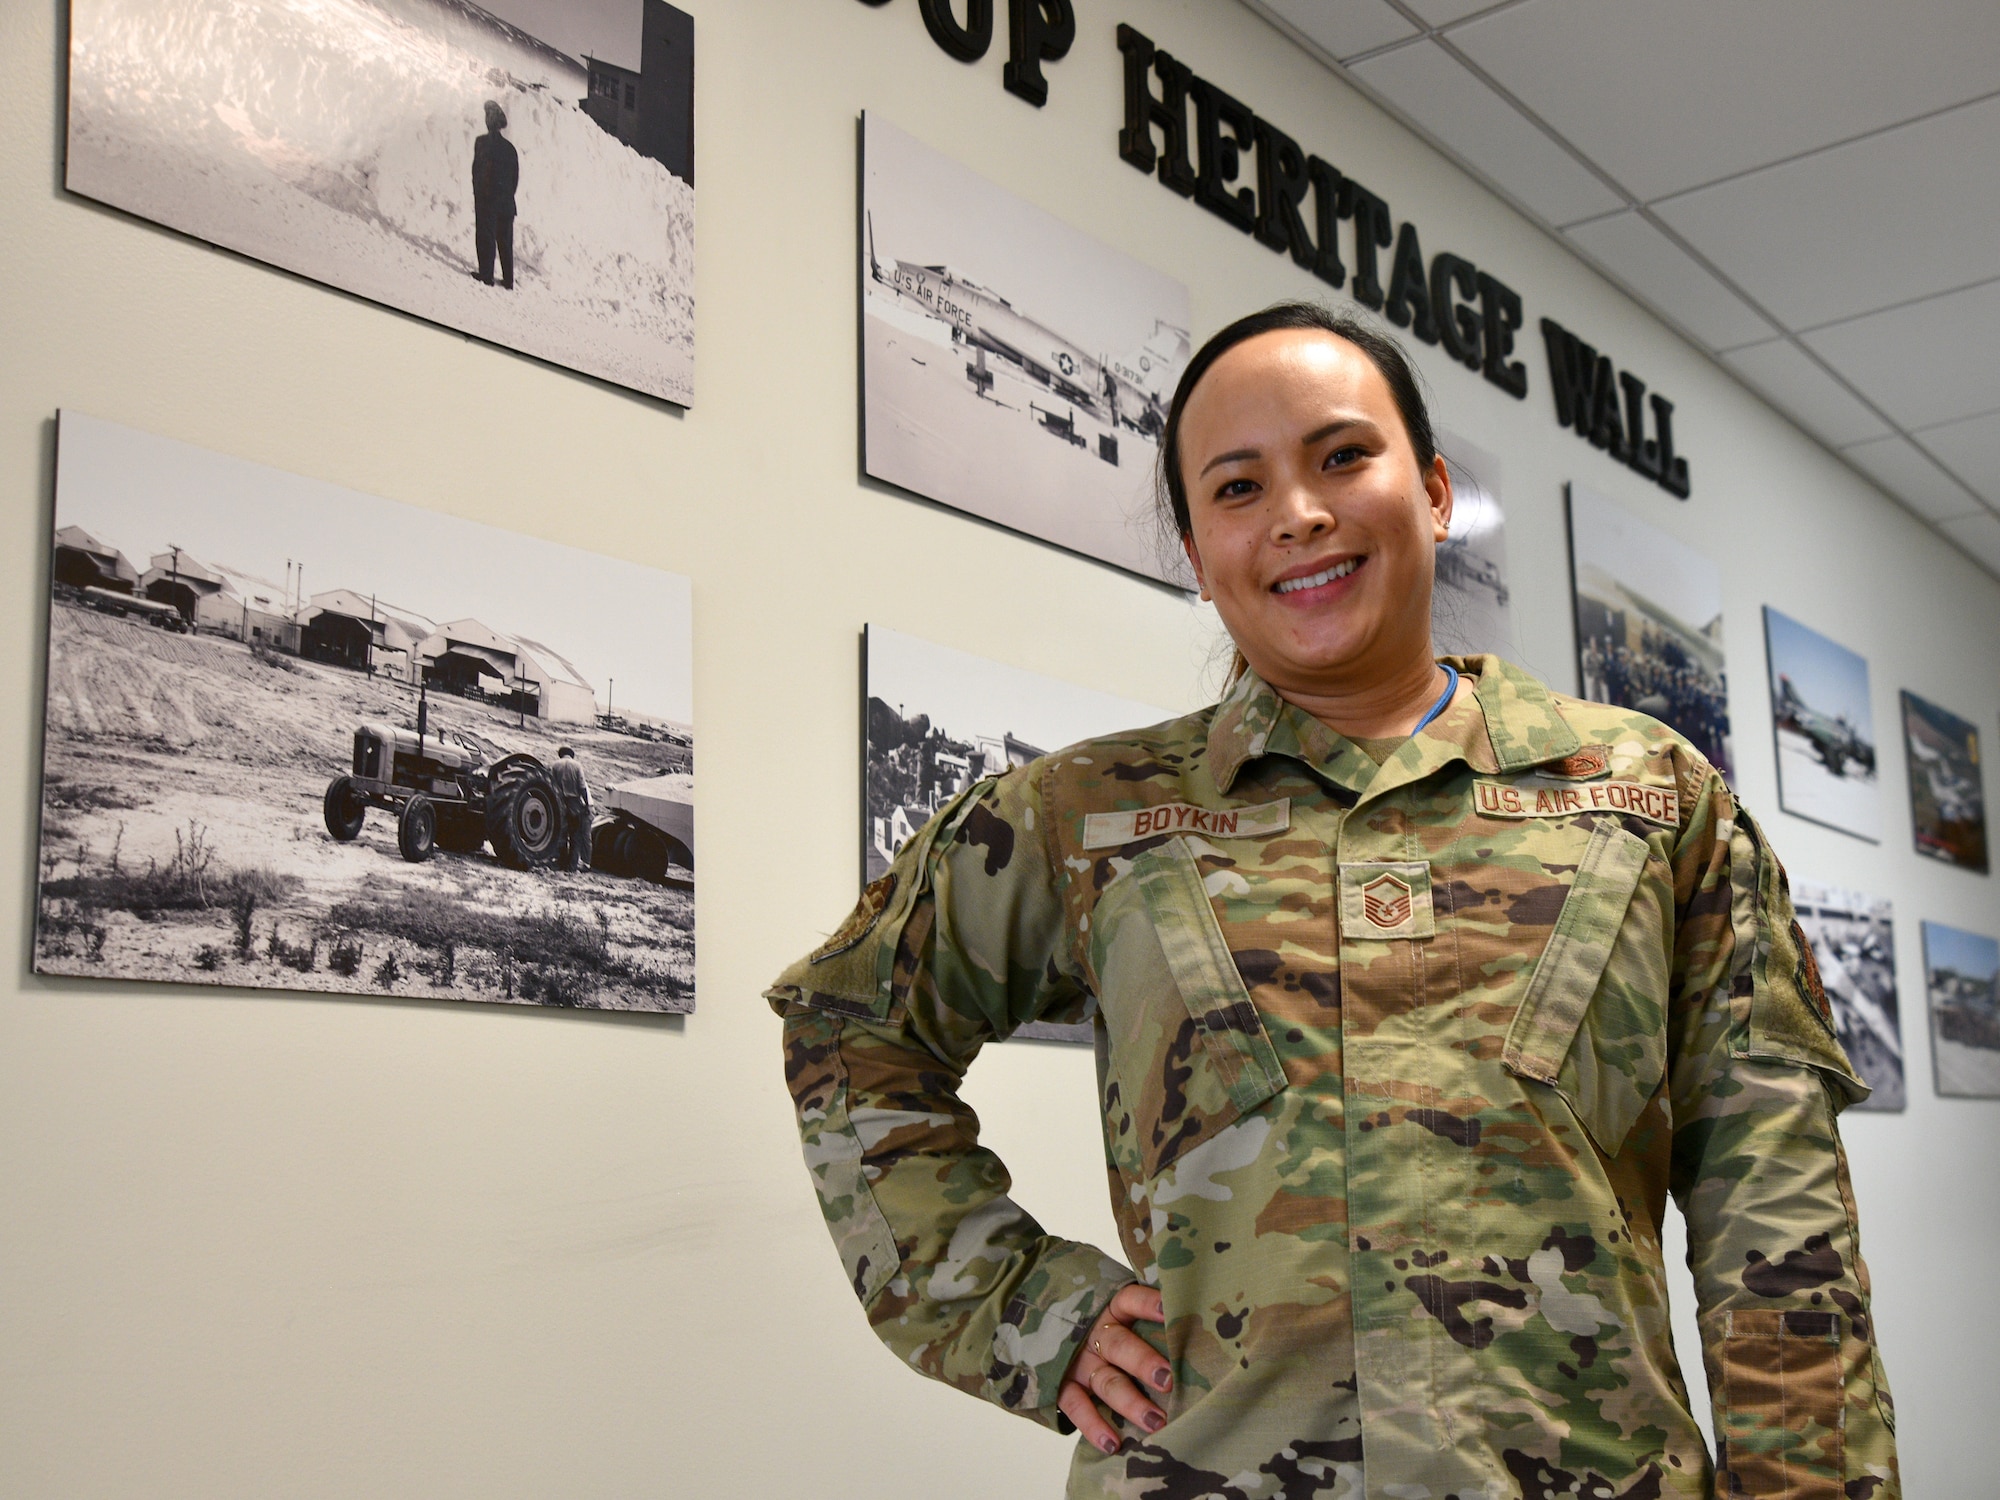 Air Force Master Sgt. Zenvi Boykin is true “blue,” having served 16 total years, nine as an active duty airman. She currently serves in the D.C. Air National Guard’s 113th Wing Commander's Support Staff, a position that she says is consistently busy and reliant on personal interactions.